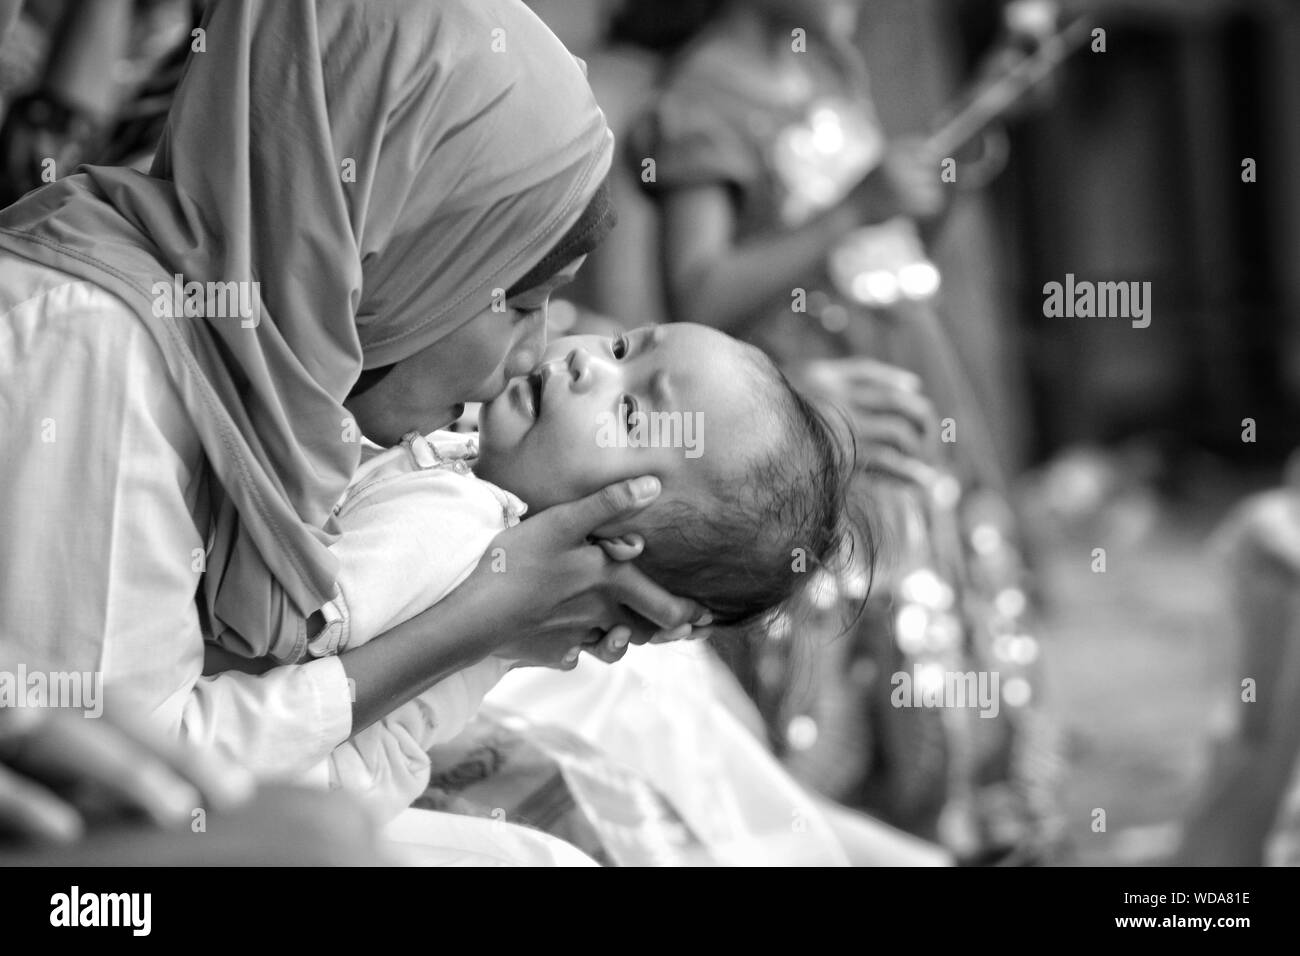 Featured image of post Mother And Baby Images Black And White / If you are a parent and want to get the best out of your life,then save baby boys cute newborn baby black newborn baby newborn baby sleeping newborn baby with mother free newborn baby boy images ,newborn baby s newborn baby kittens.